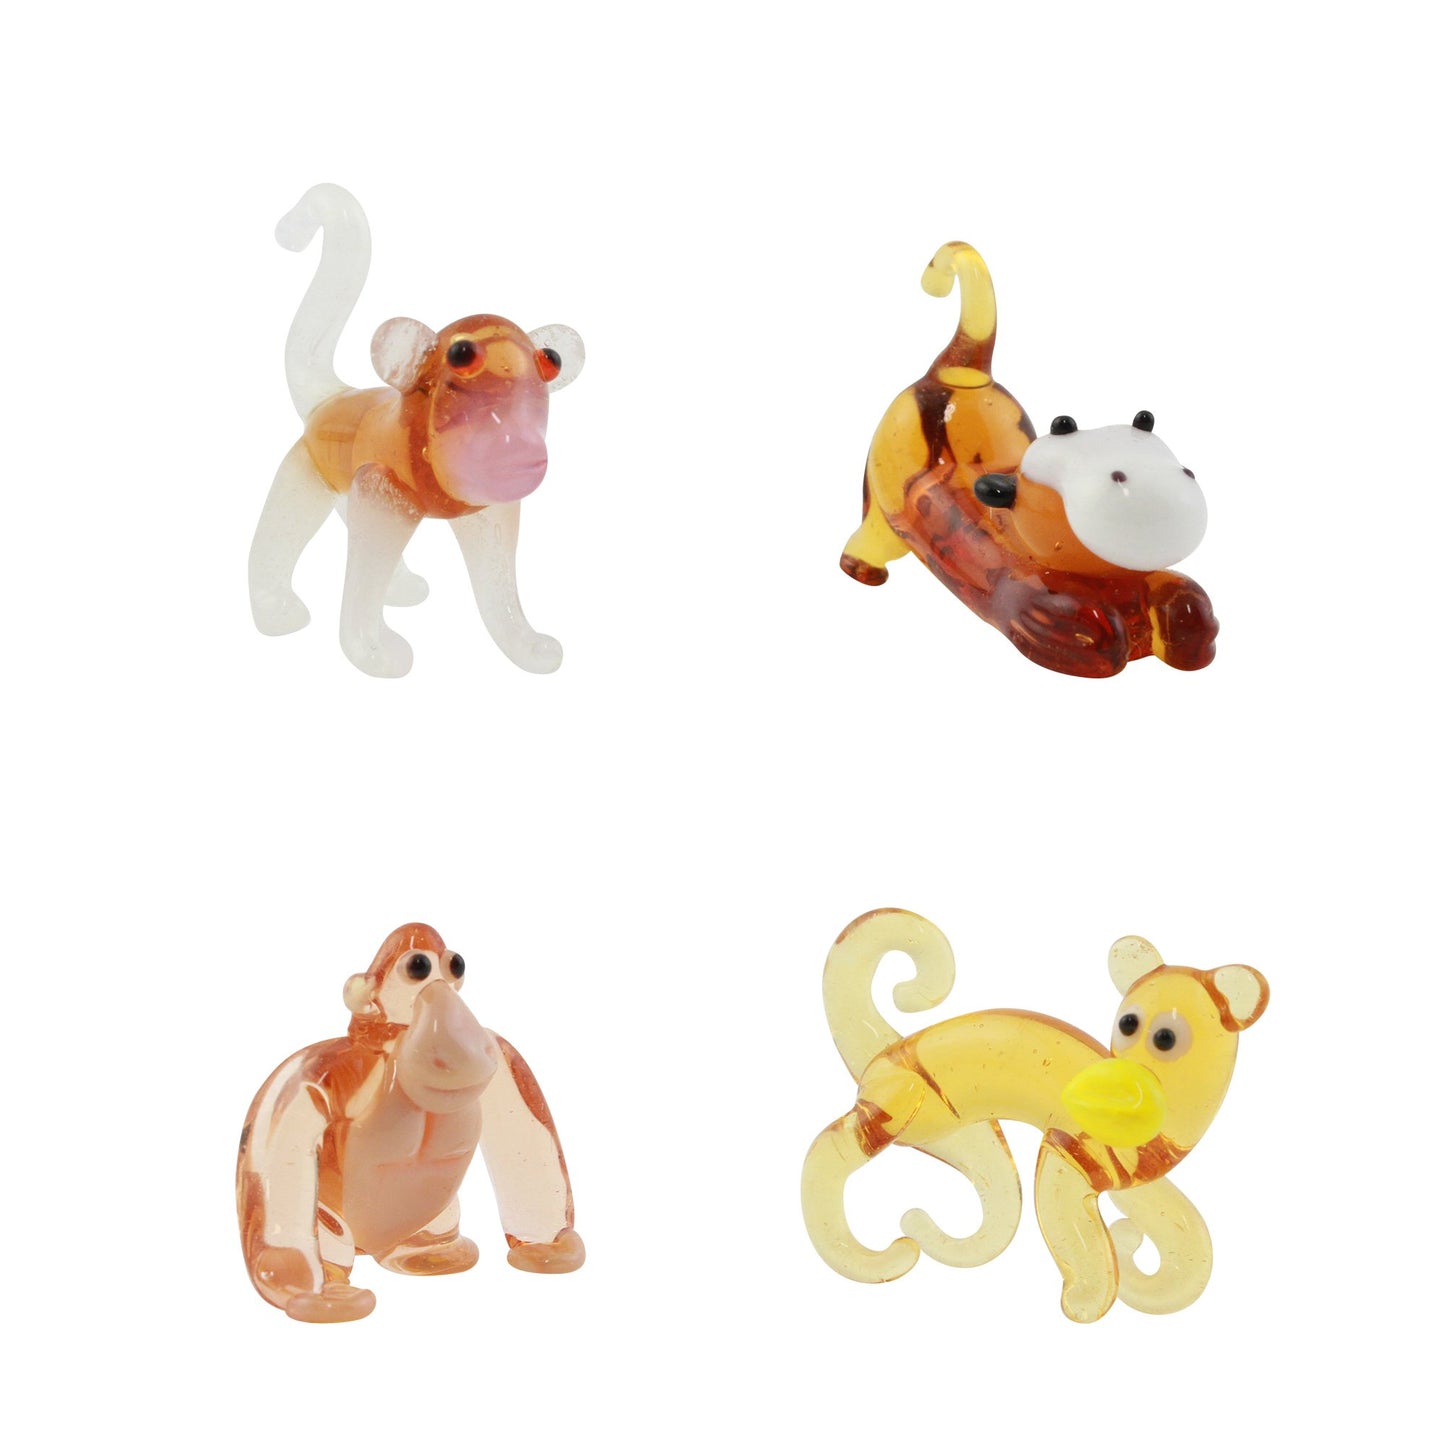 LookingGlass Mammals Set Minature Glass Collectibles Product Image